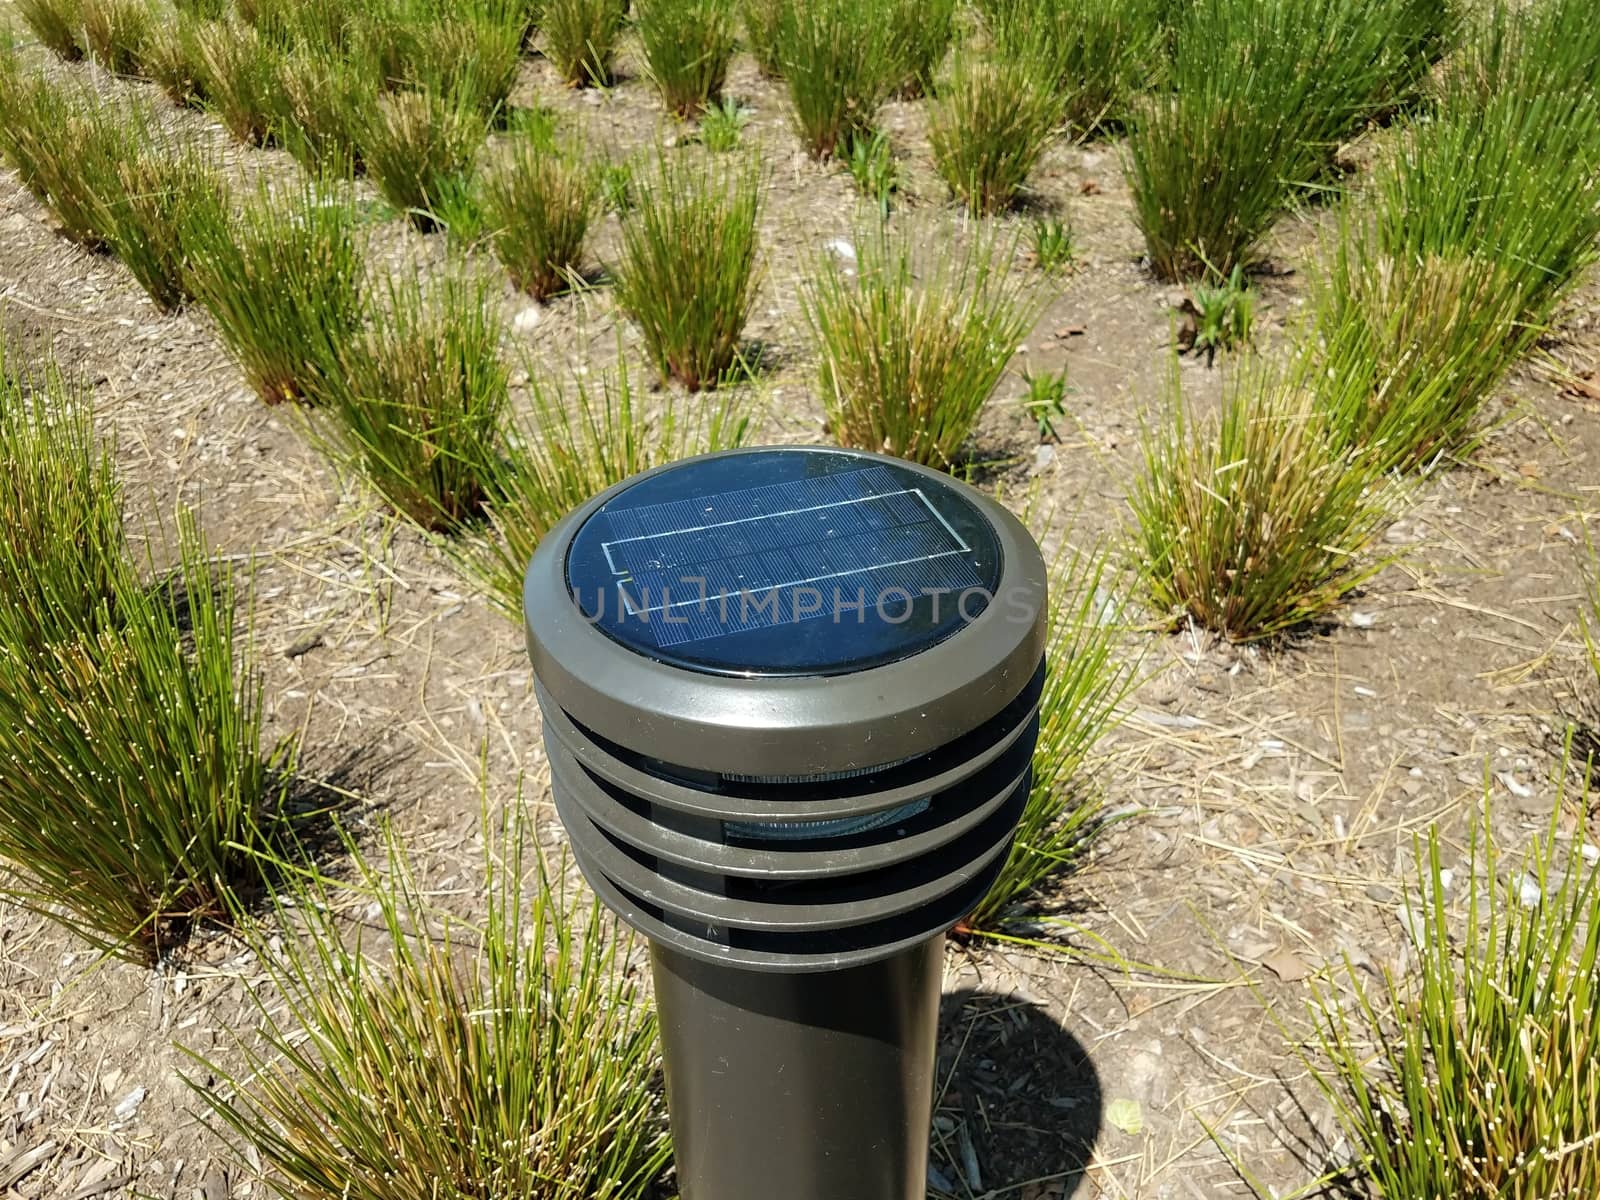 solar powered light or lighting with green grasses in the soil